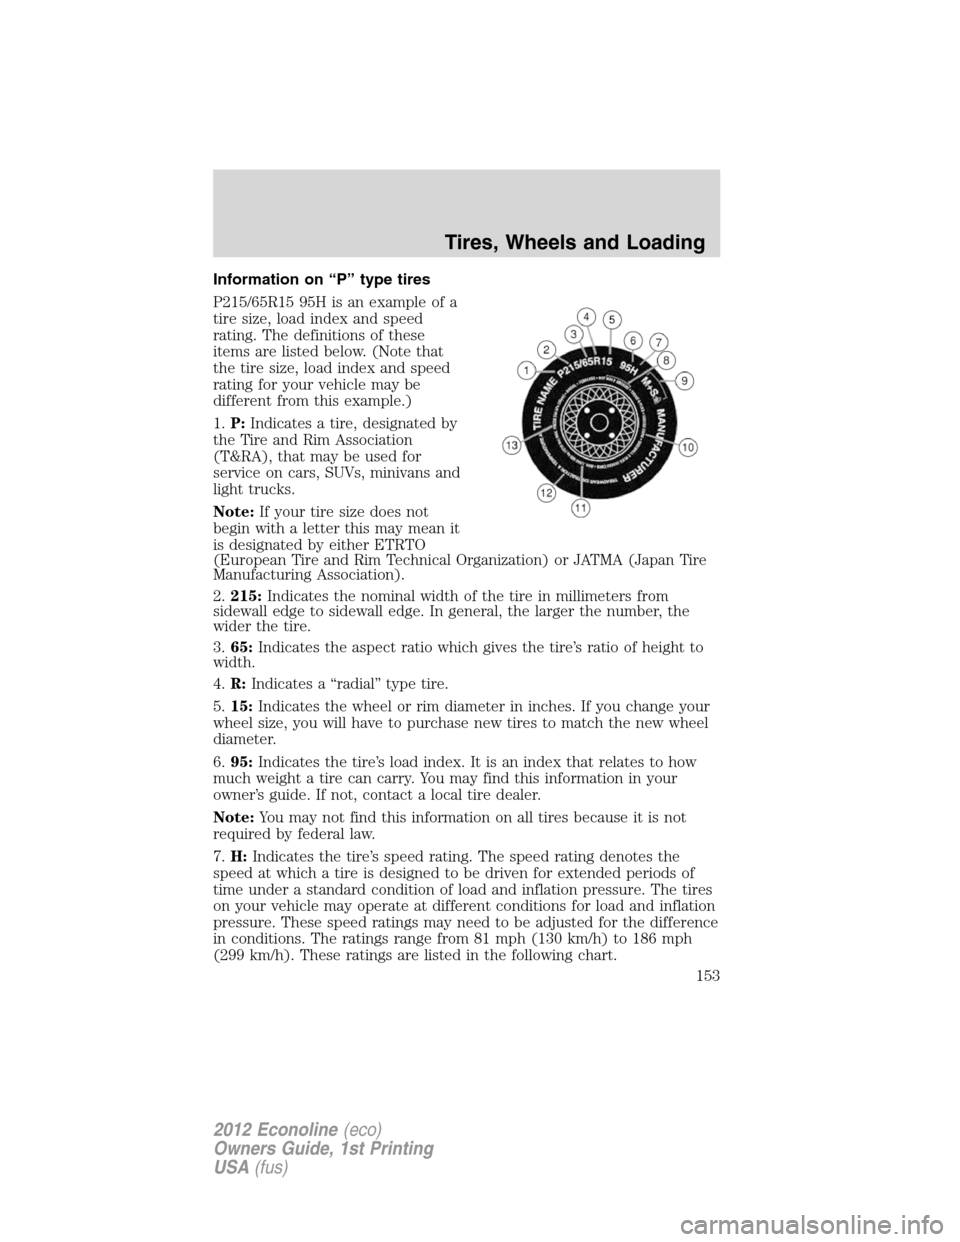 FORD E SERIES 2012 4.G Owners Manual Information on “P” type tires
P215/65R15 95H is an example of a
tire size, load index and speed
rating. The definitions of these
items are listed below. (Note that
the tire size, load index and sp